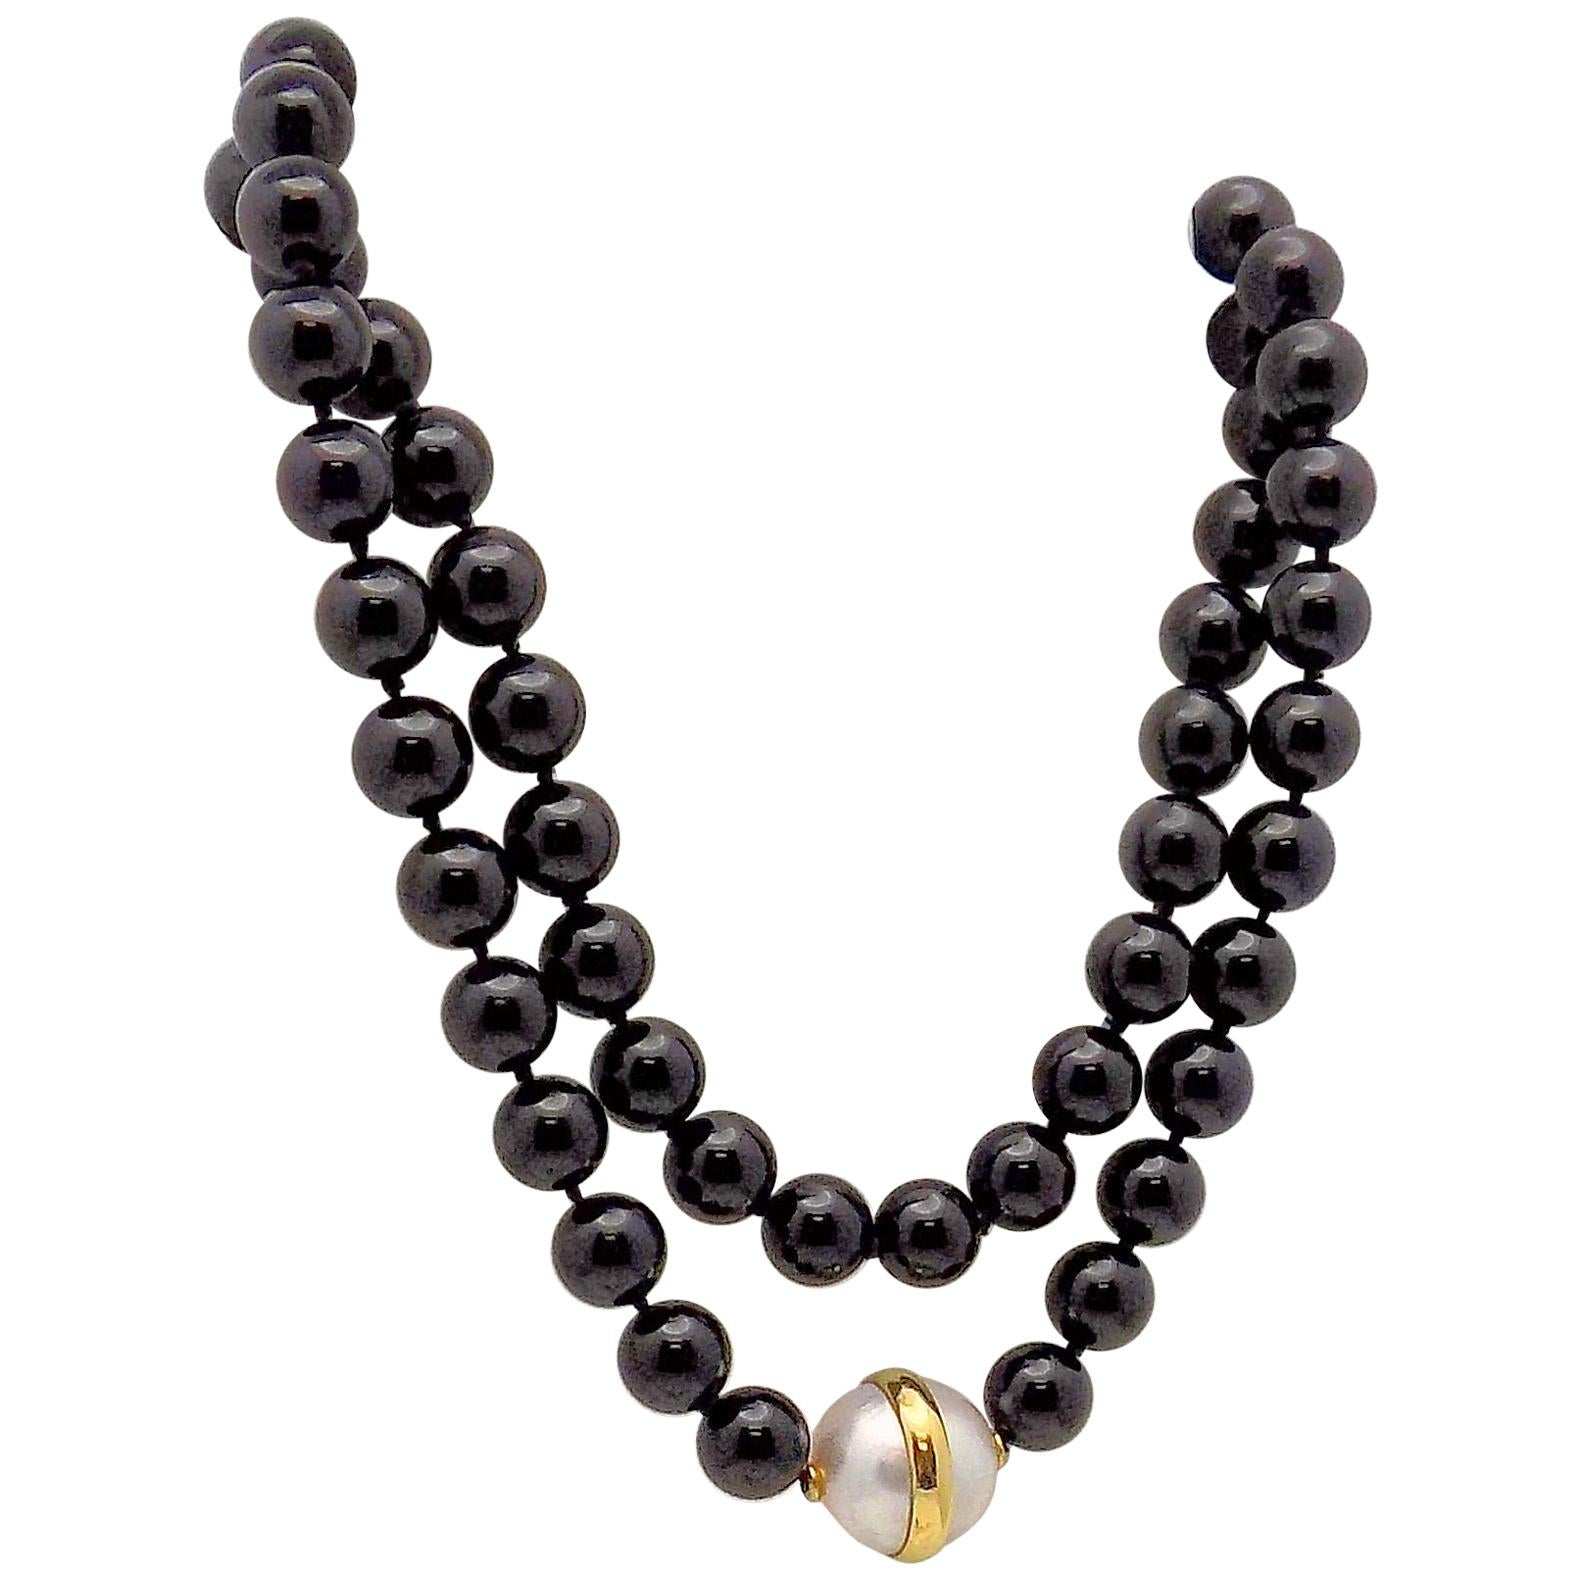 Elegant Suite of Jewelry consists of Black Onyx and Diamond Clip Earrings; Black Onyx and Diamond Ring; Black Onyx Bead and Mabé Pearl Necklace...First there is a Pair of 18 Karat Yellow Gold/White Gold Clip Earrings, 2 Round Brilliant Diamonds 0.20